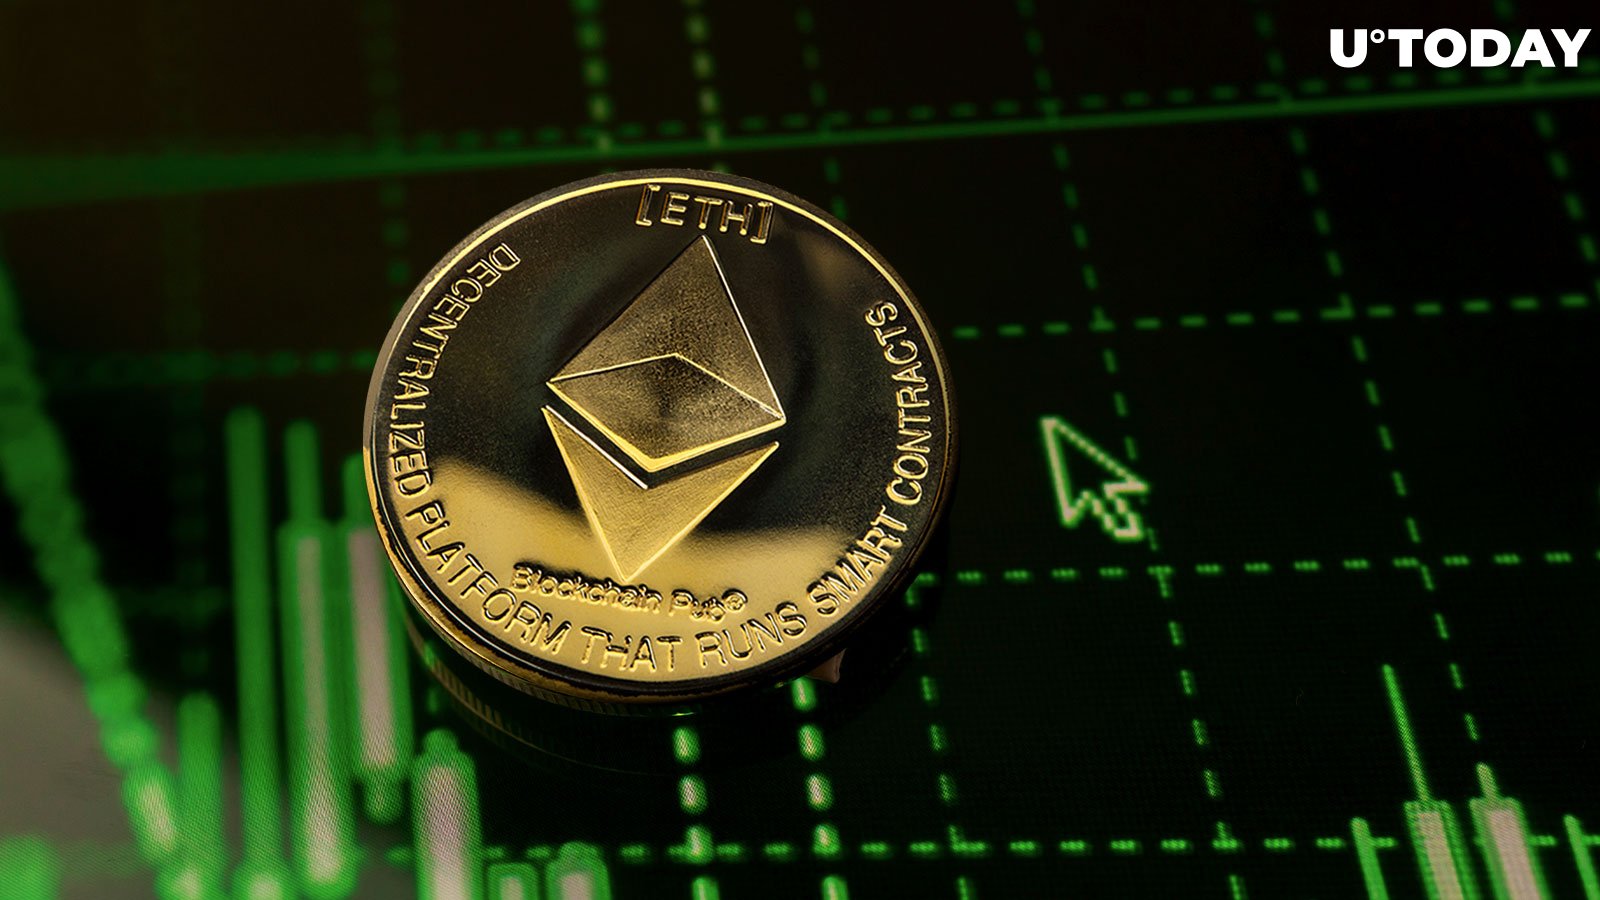 Ethereum (ETH) to Hit All-Time High Soon, Top Analyst Predicts